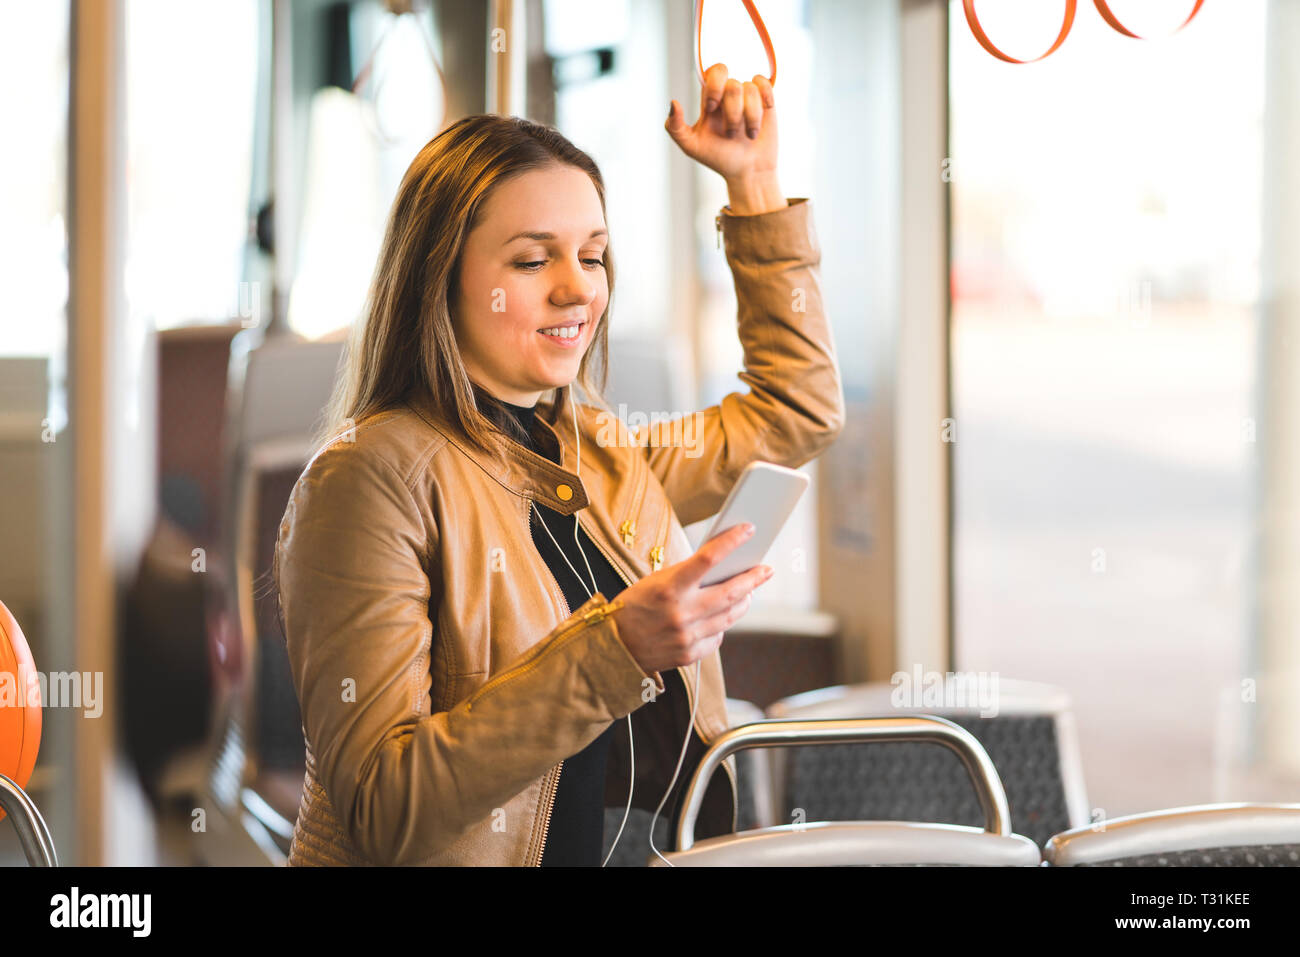 Woman standing in train, tram or bus holding the handle and using mobile phone. Happy female passenger texting with smartphone while riding. Stock Photo